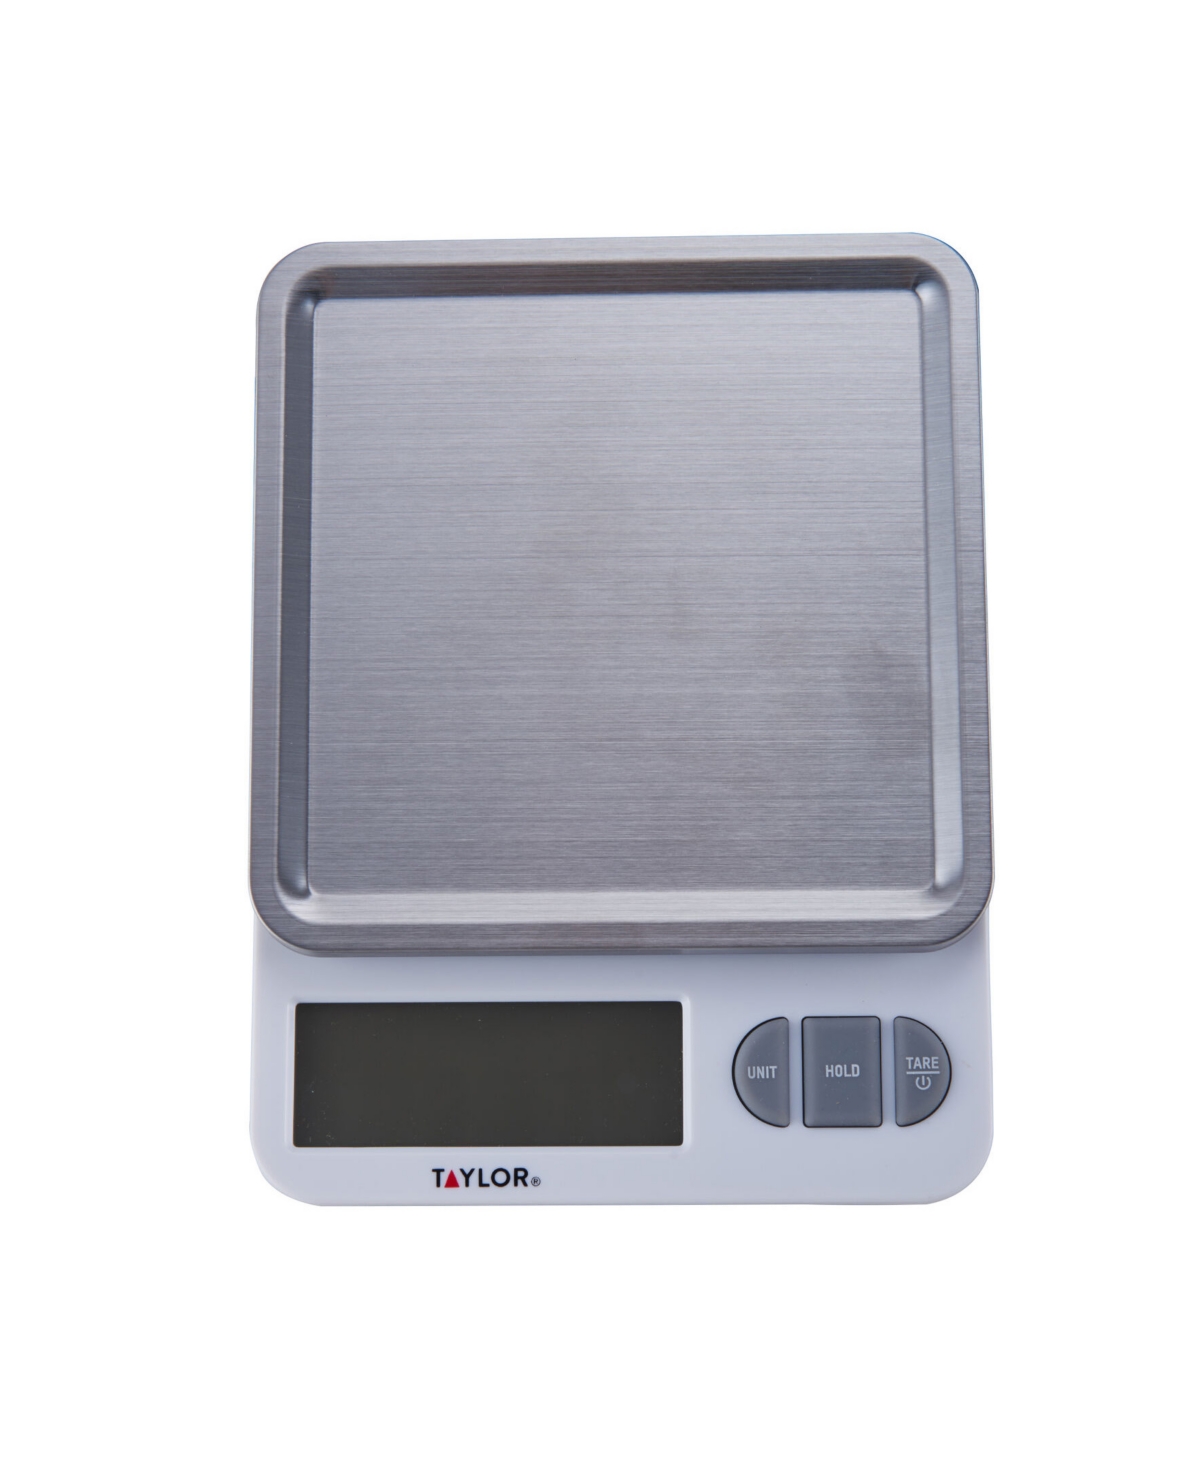 Taylor Digital Kitchen Scale With Removable Stainless Tray Set In White